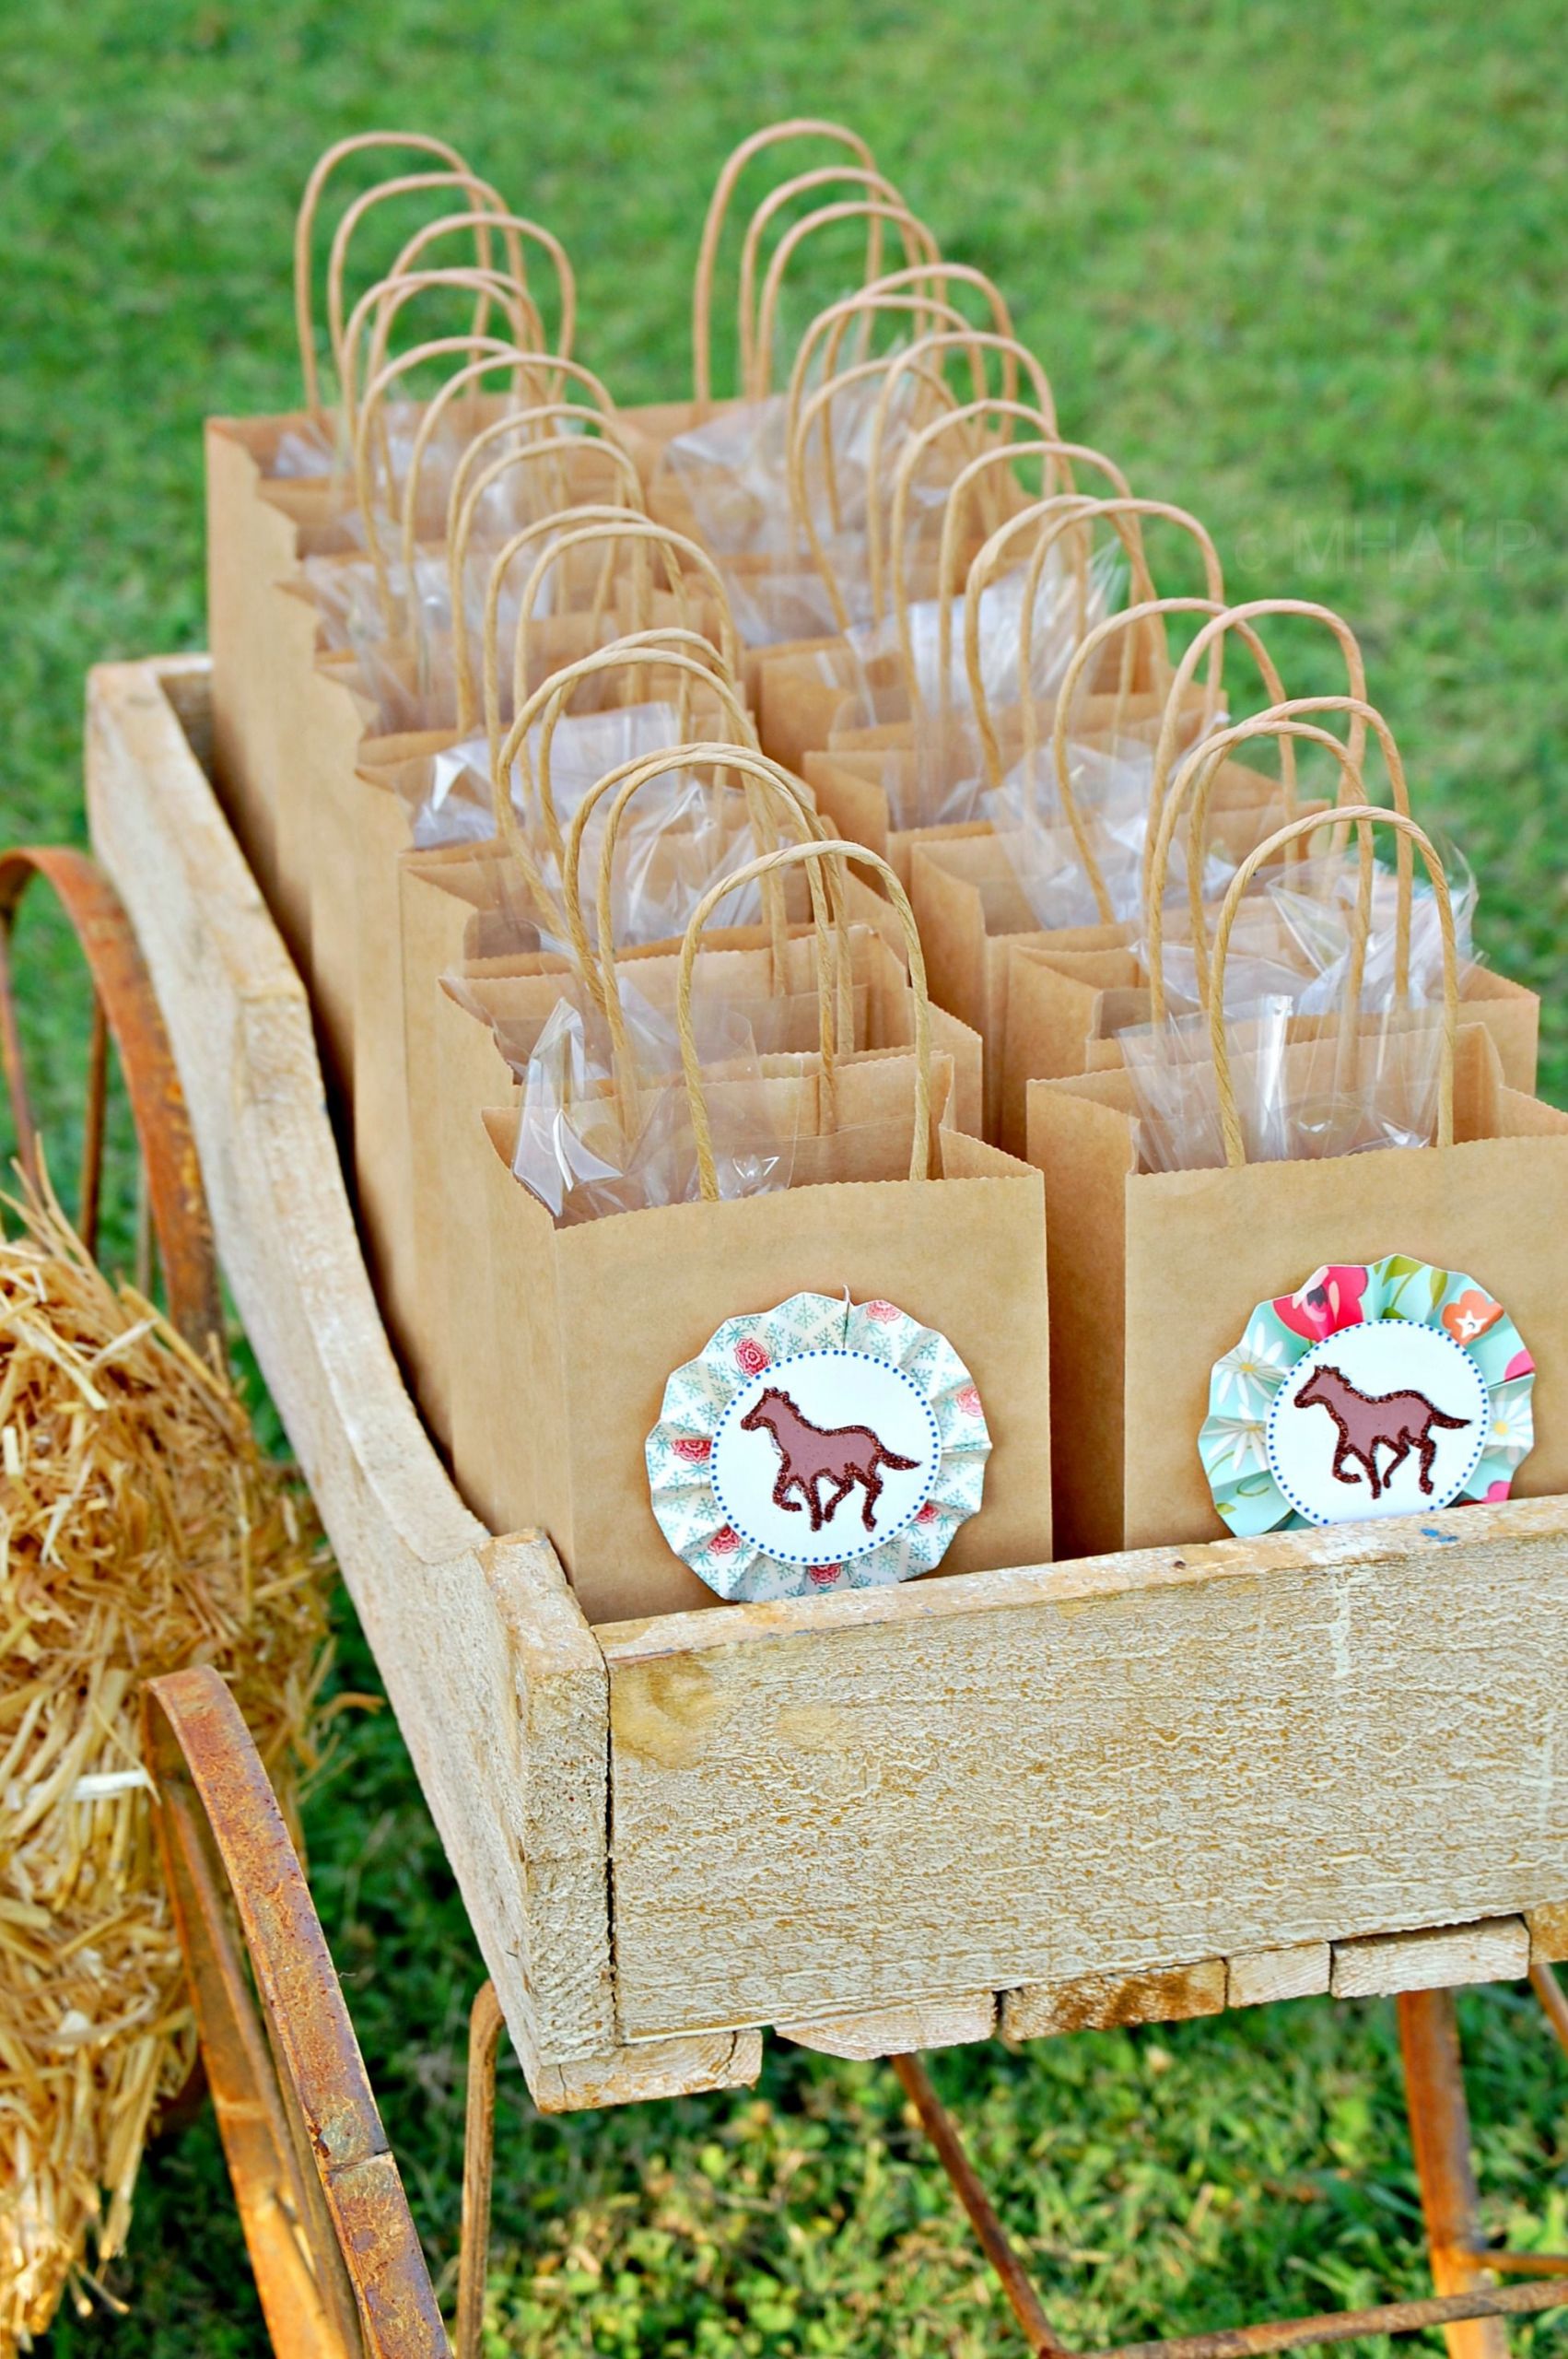 Horse Birthday Decorations
 horse party favors from Mary Had a Little Party in 2019